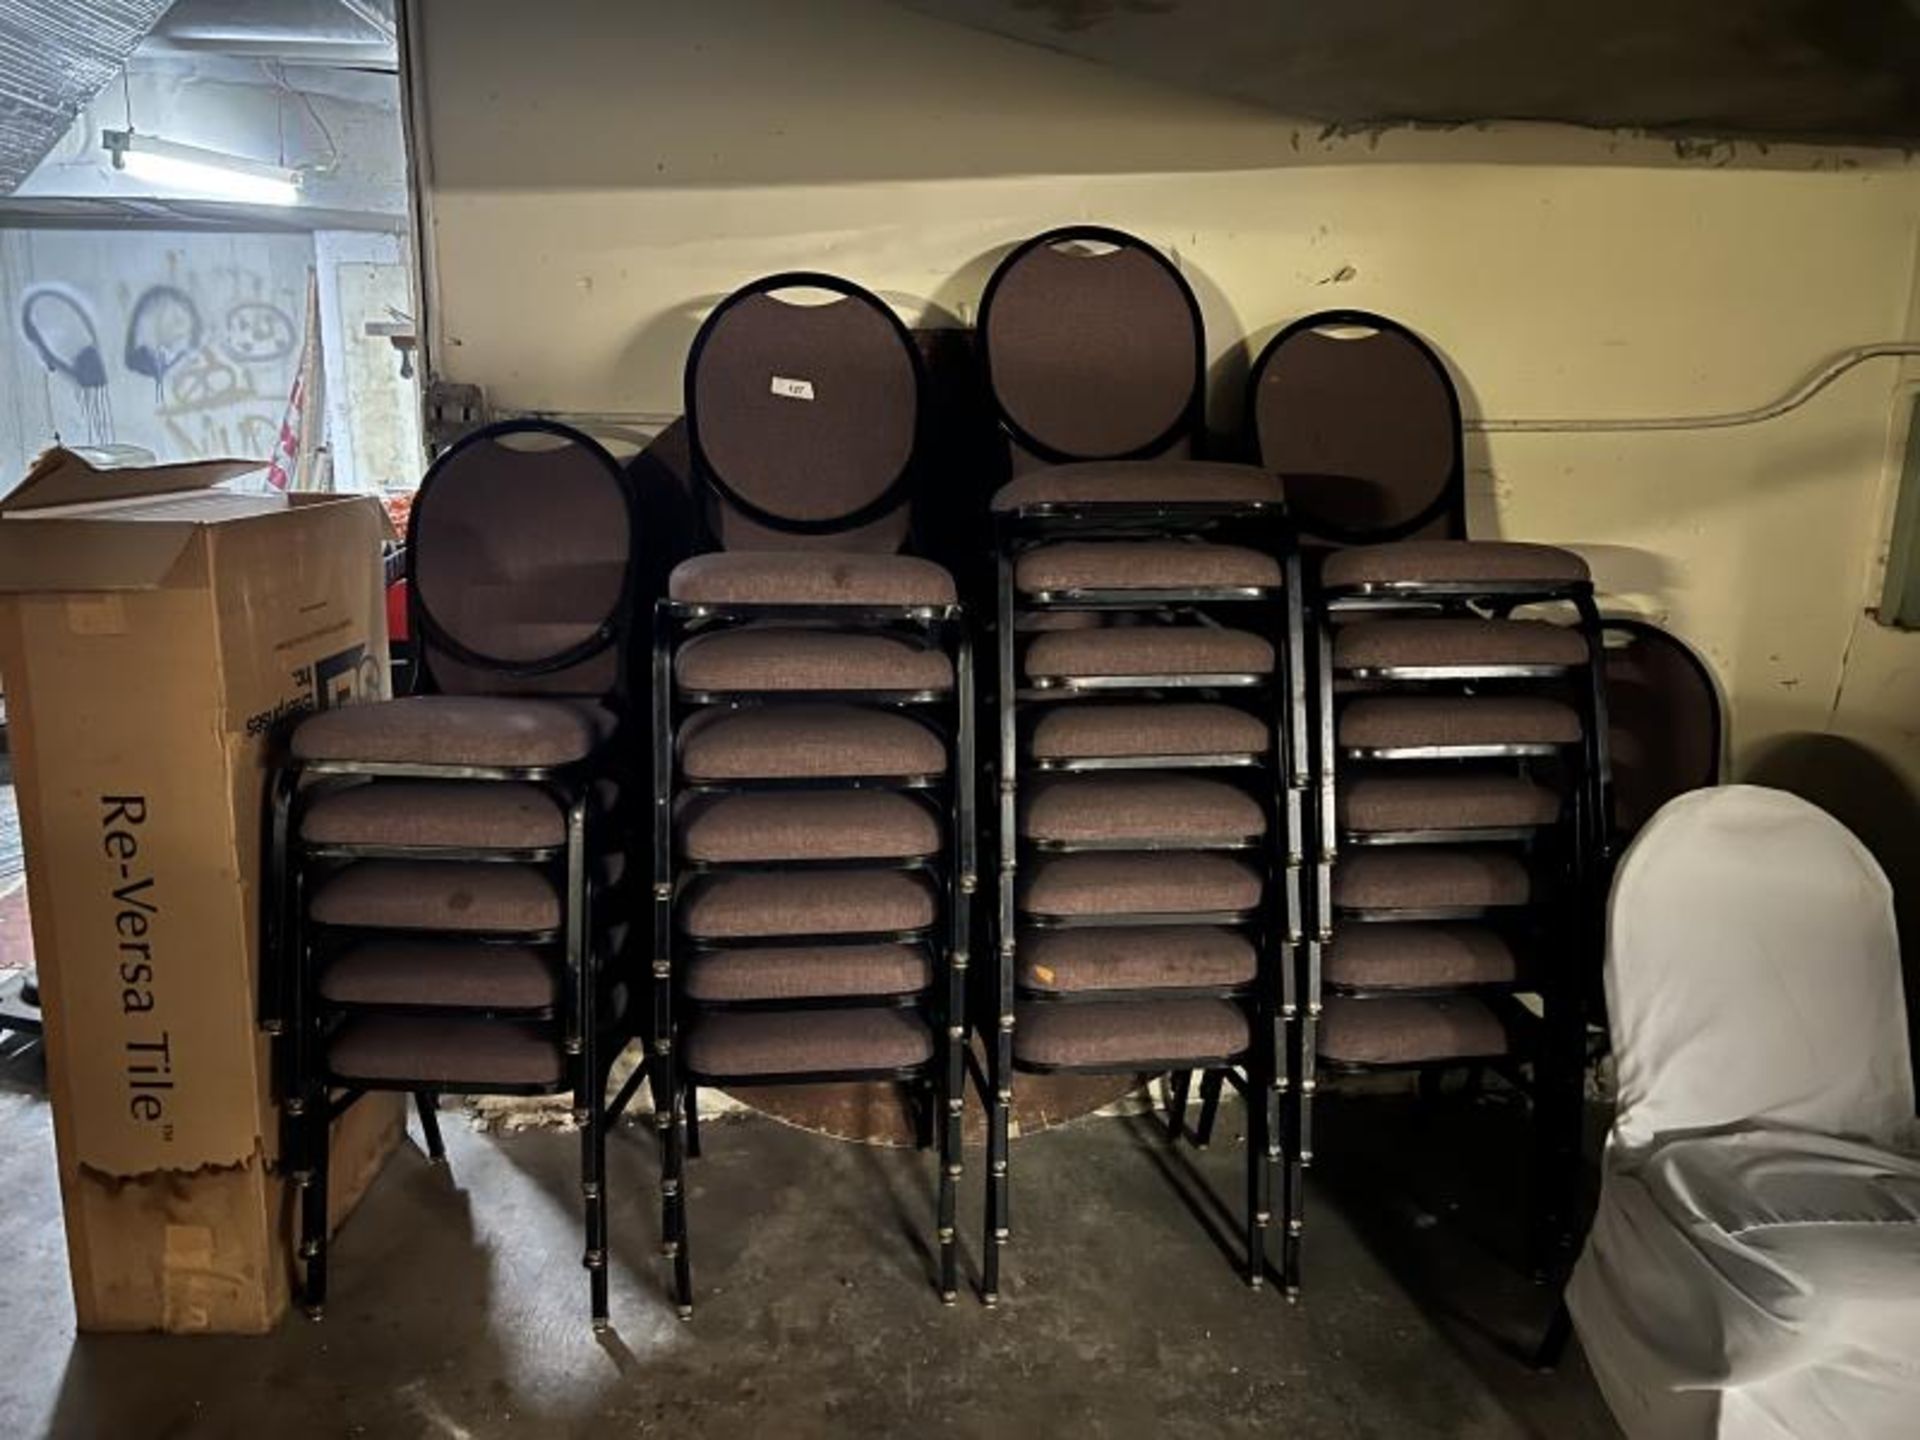 Approx. 125 Banquet Chairs, Cloth, in Basement Kitchen